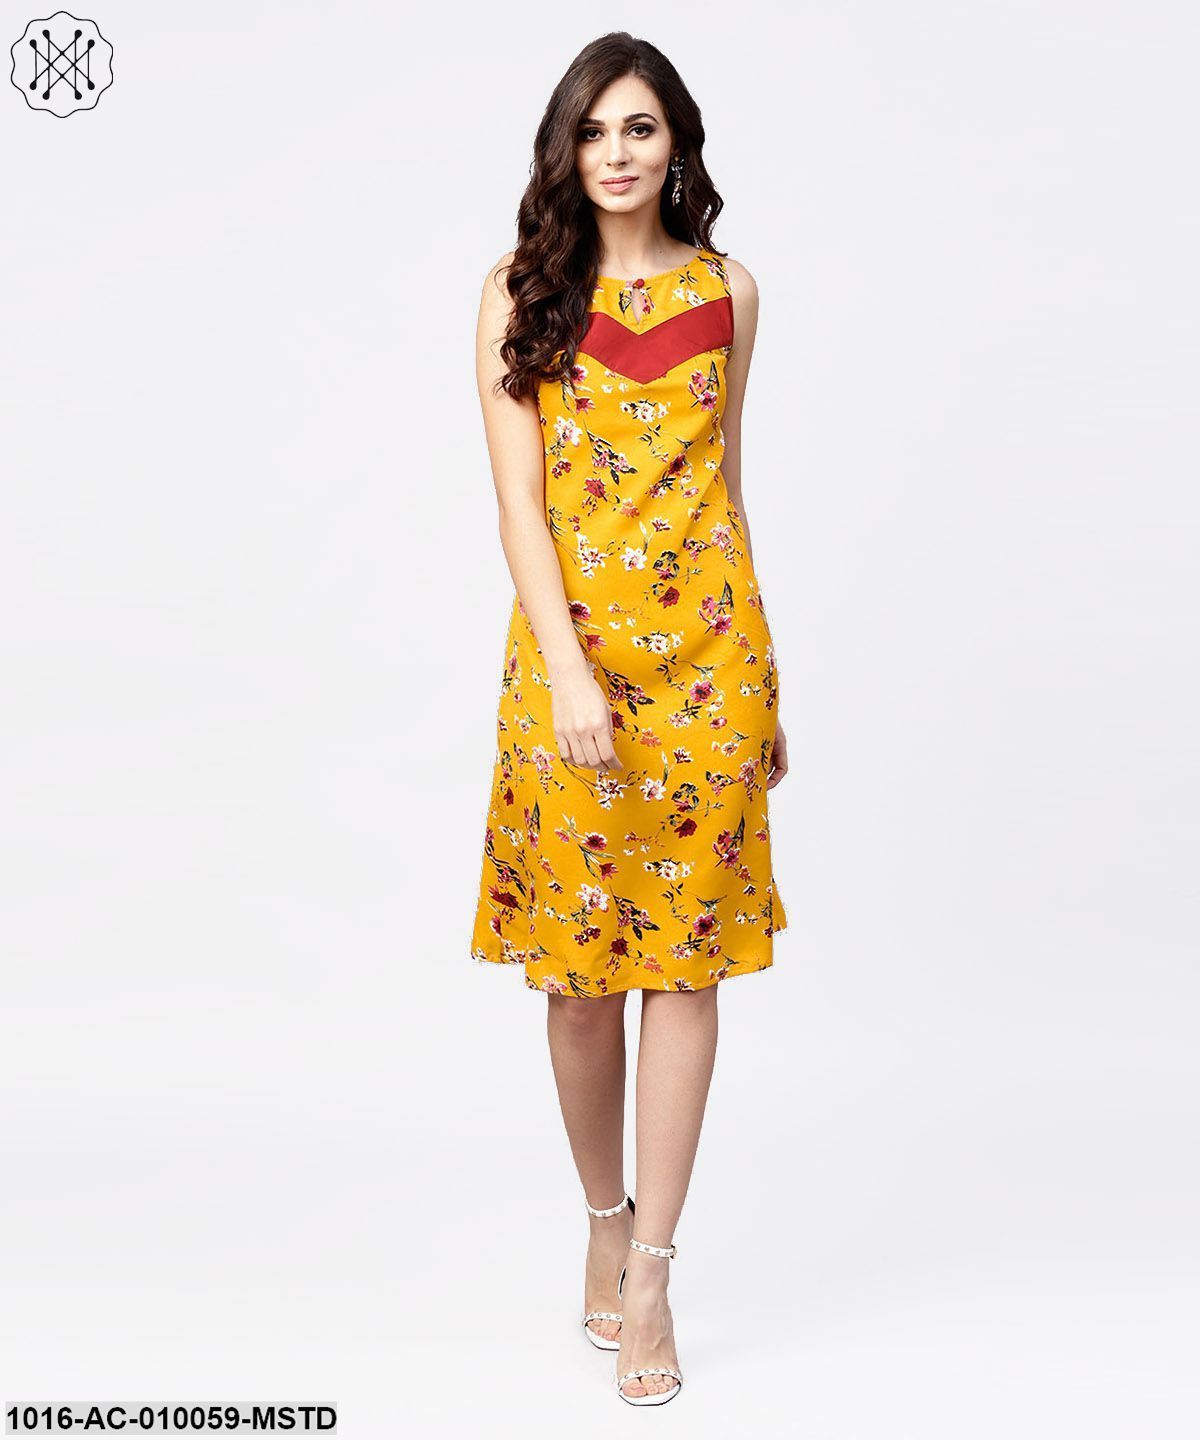 Mustard Floral Printed Sleeveless Dress With Key Hole Neck